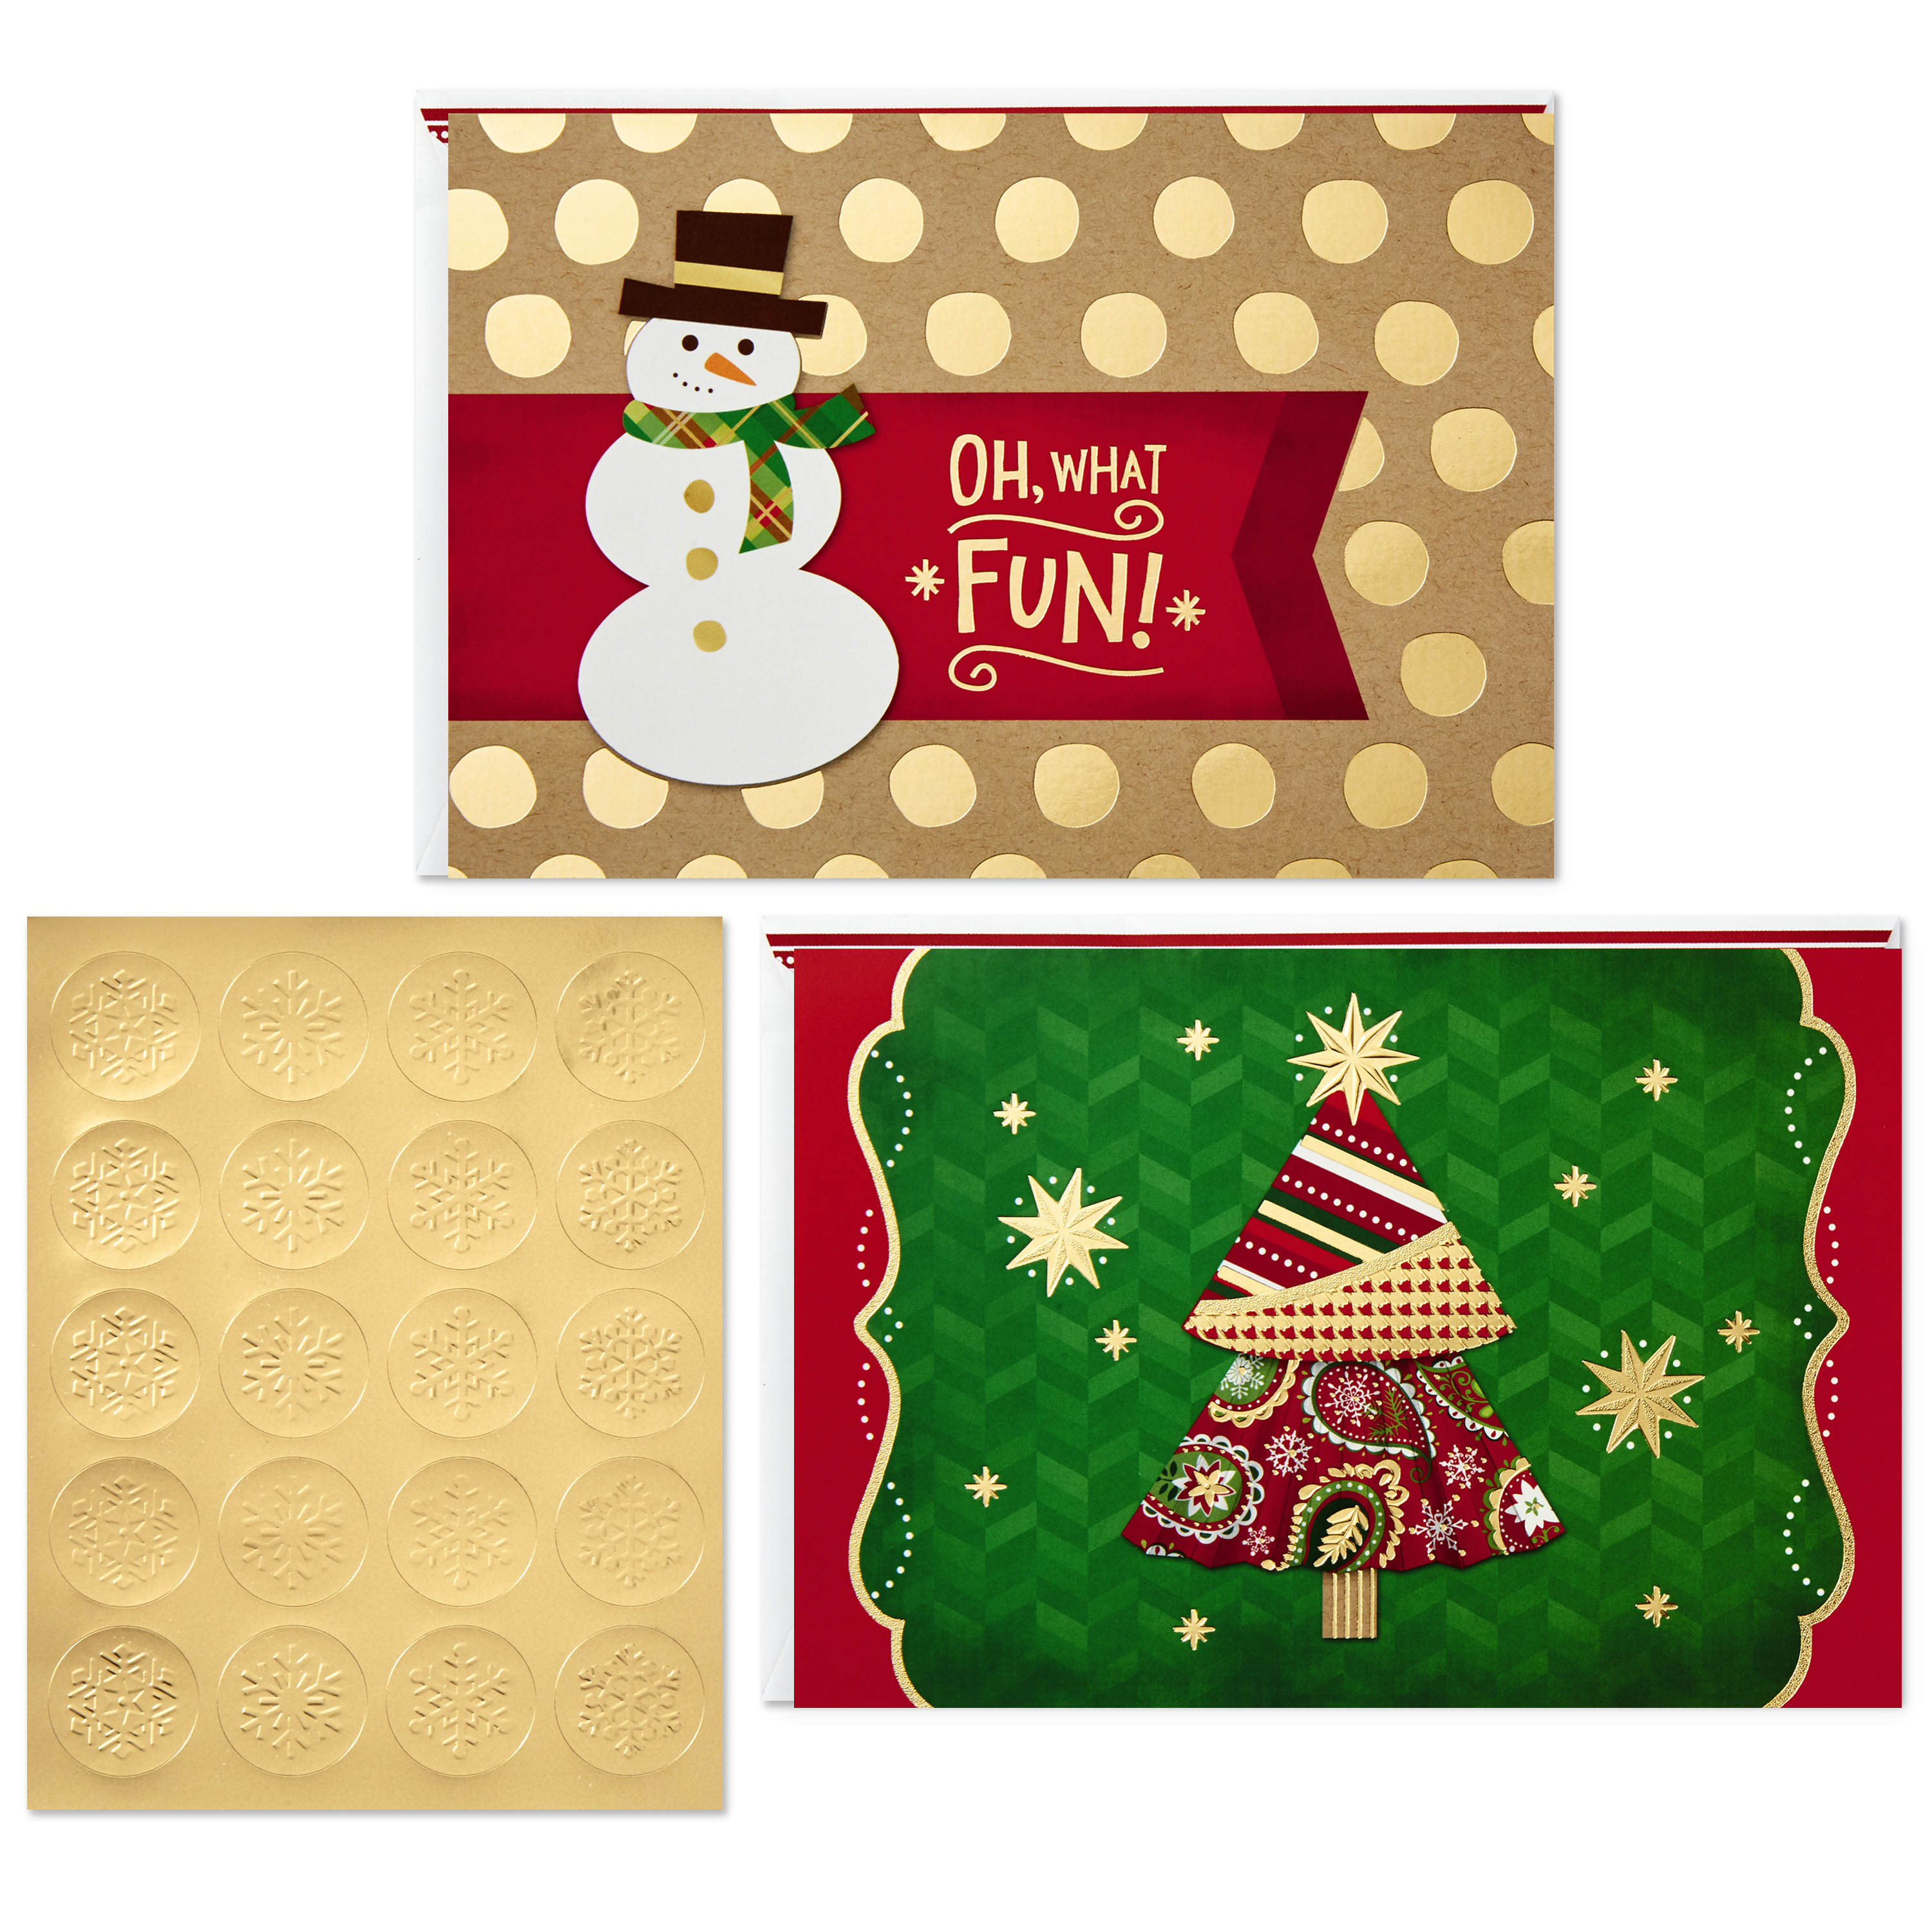 Hallmark Christmas Boxed Greeting Card Assortment, Snowman and Christmas Tree (40 Cards with Envelopes and Gold Seals) - image 1 of 7